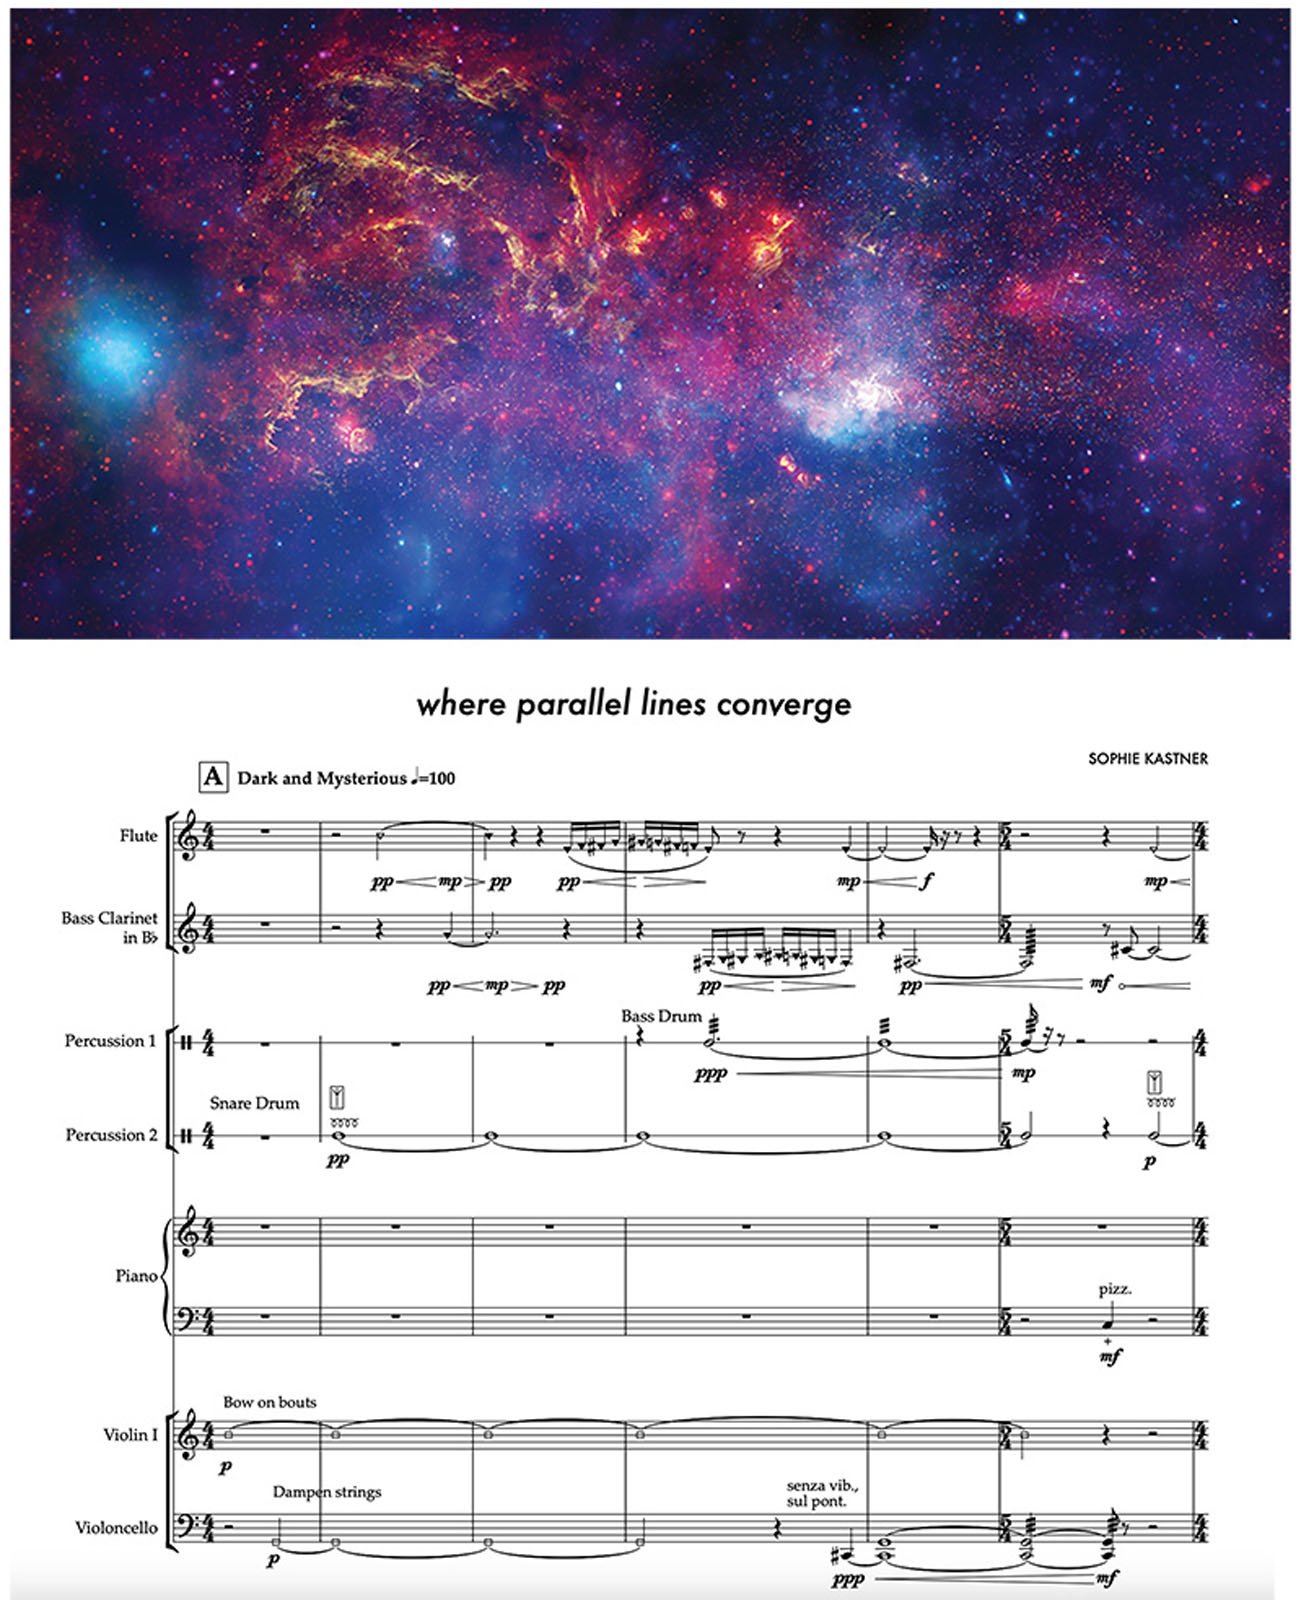 'Where Parallel Lines Converge' music of the Milky Way